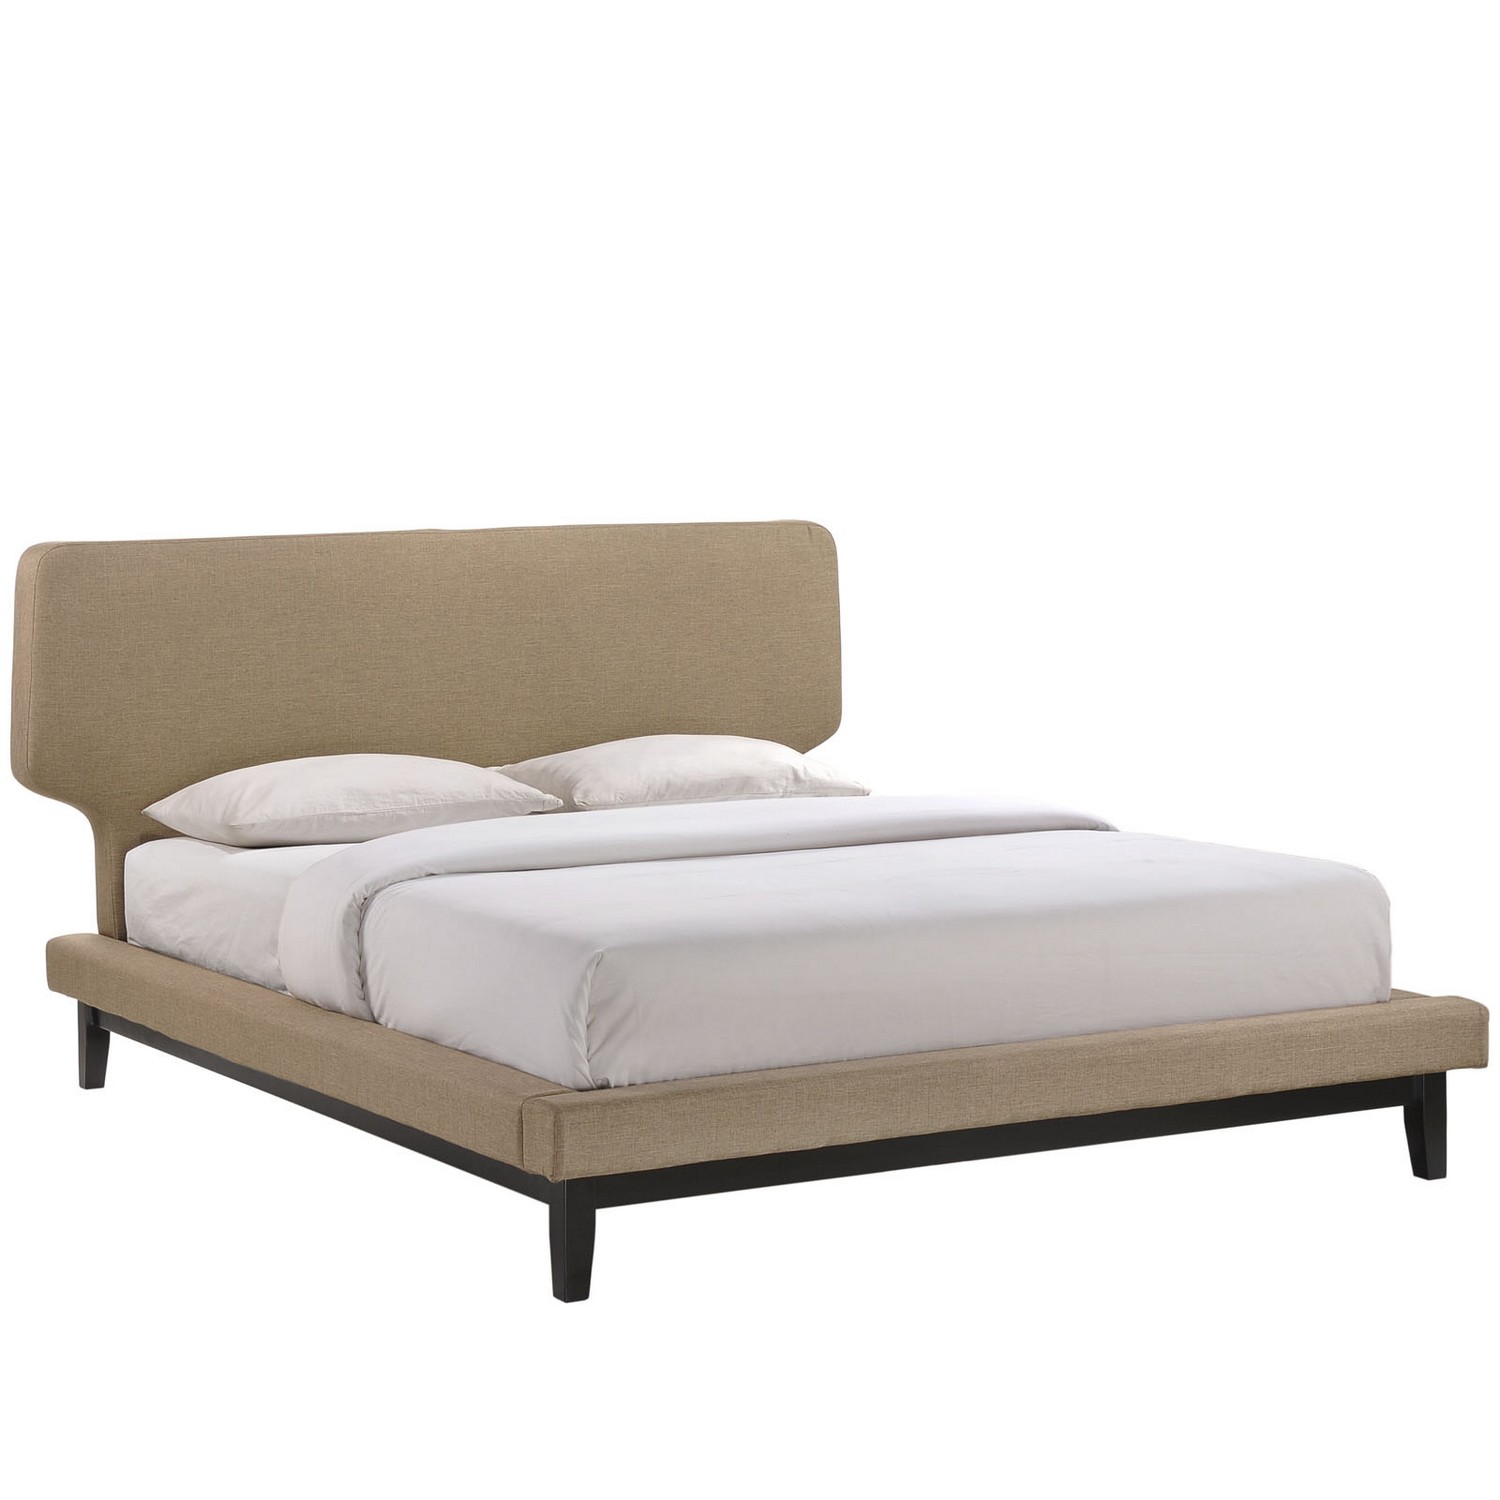 Modway Bethany Queen Bed - Black Latte